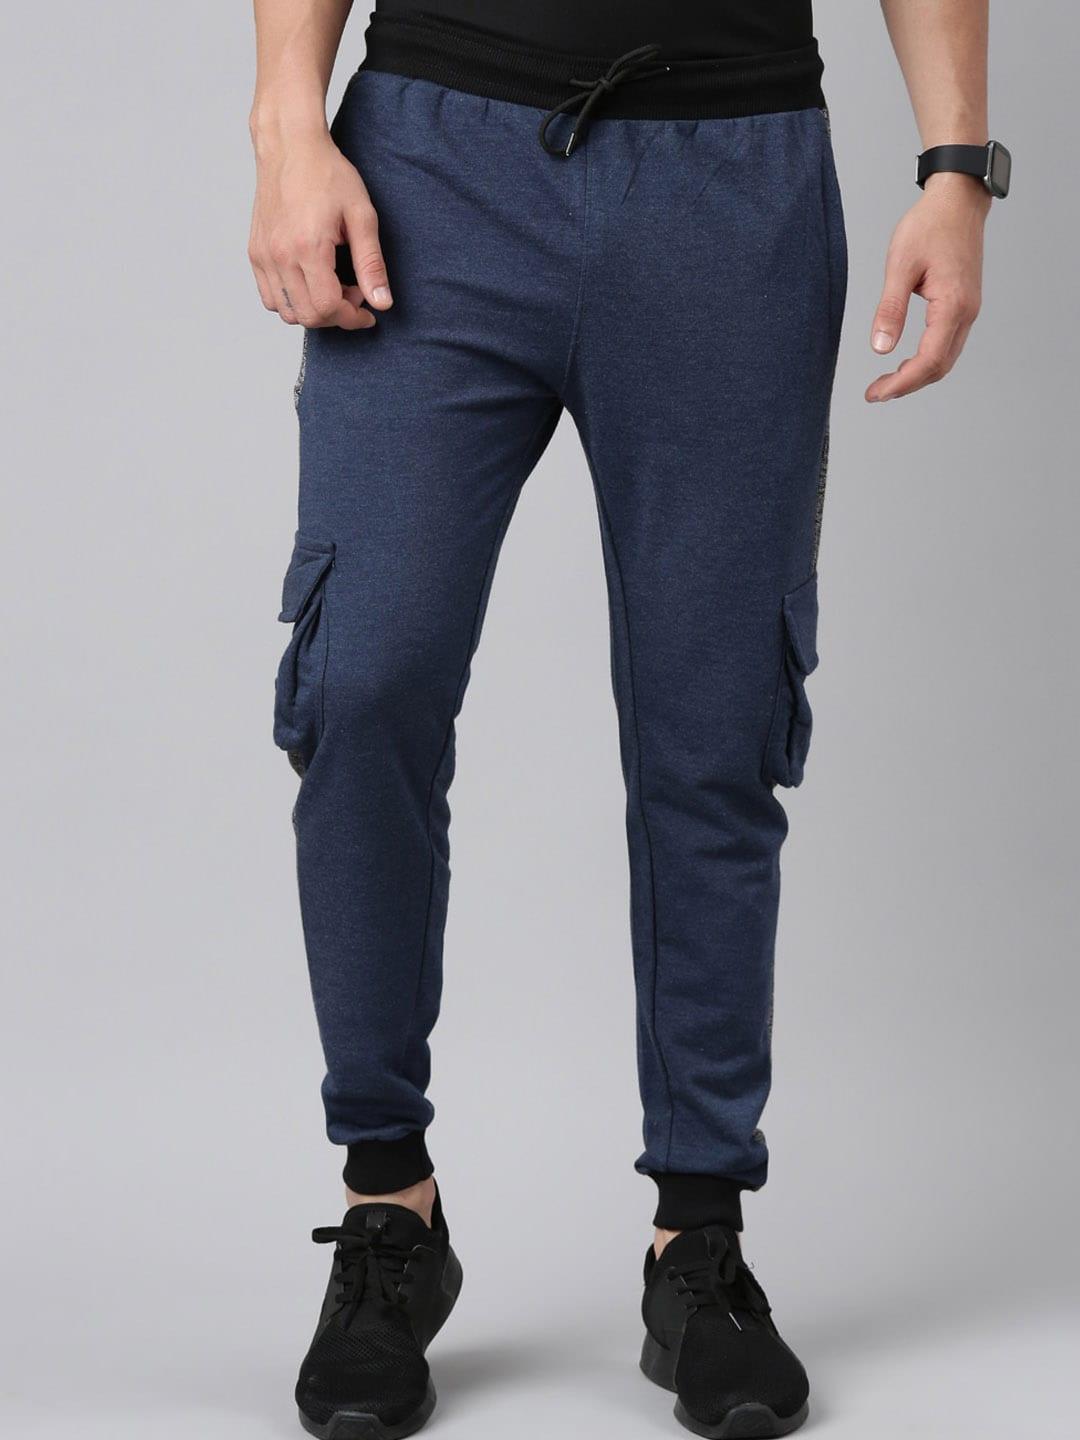 madsto-men-cotton-mid-rise-joggers